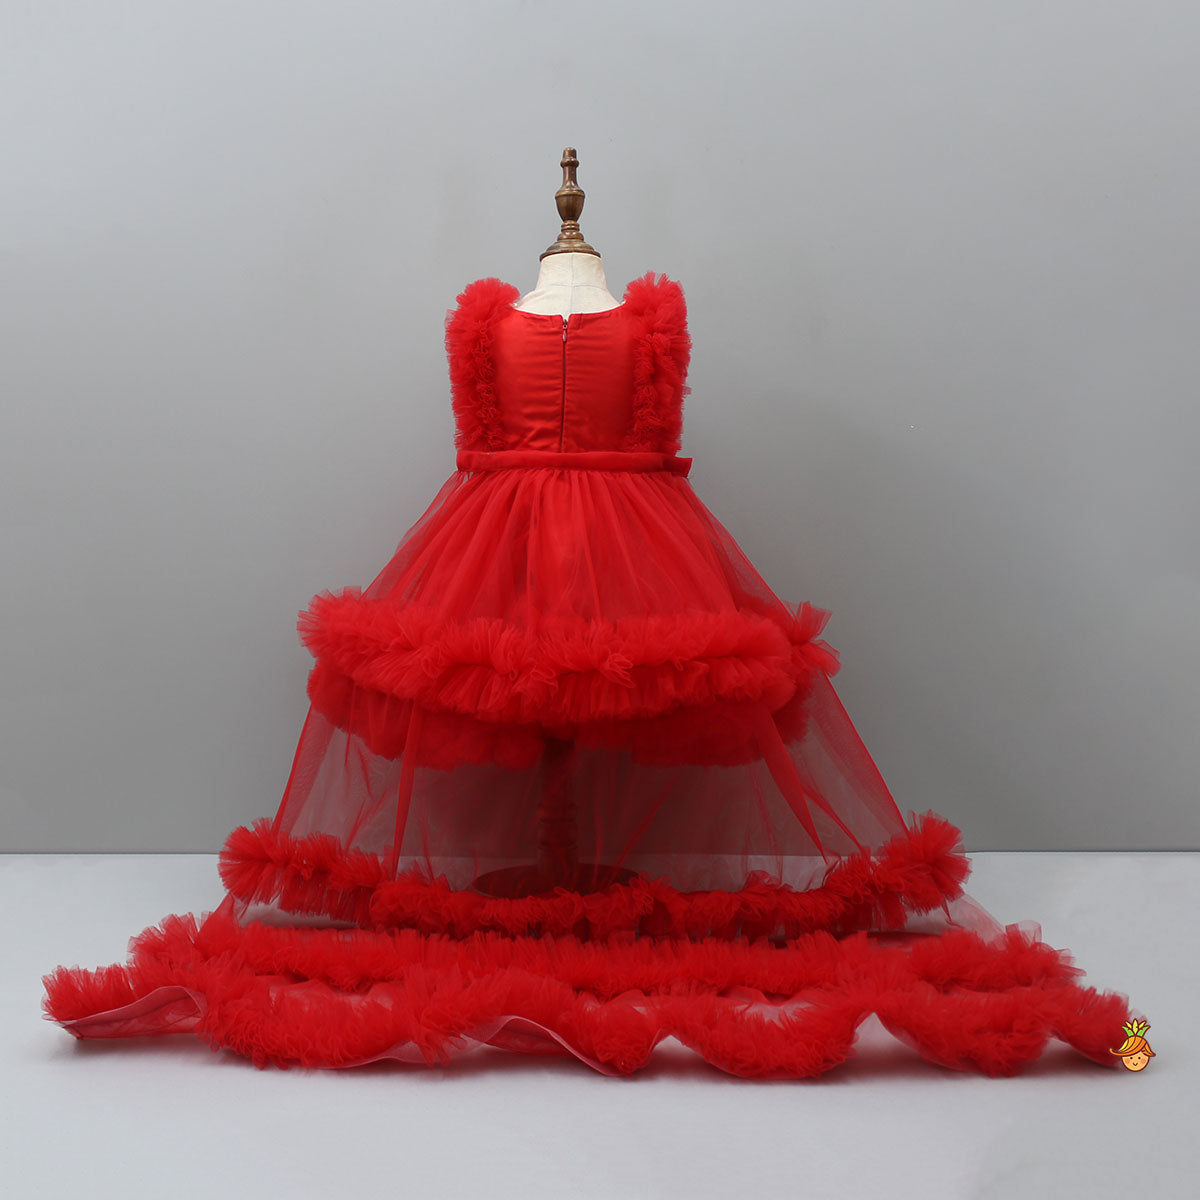 Glamorous Red Frilled Dress With Detachable Trail And Head Band